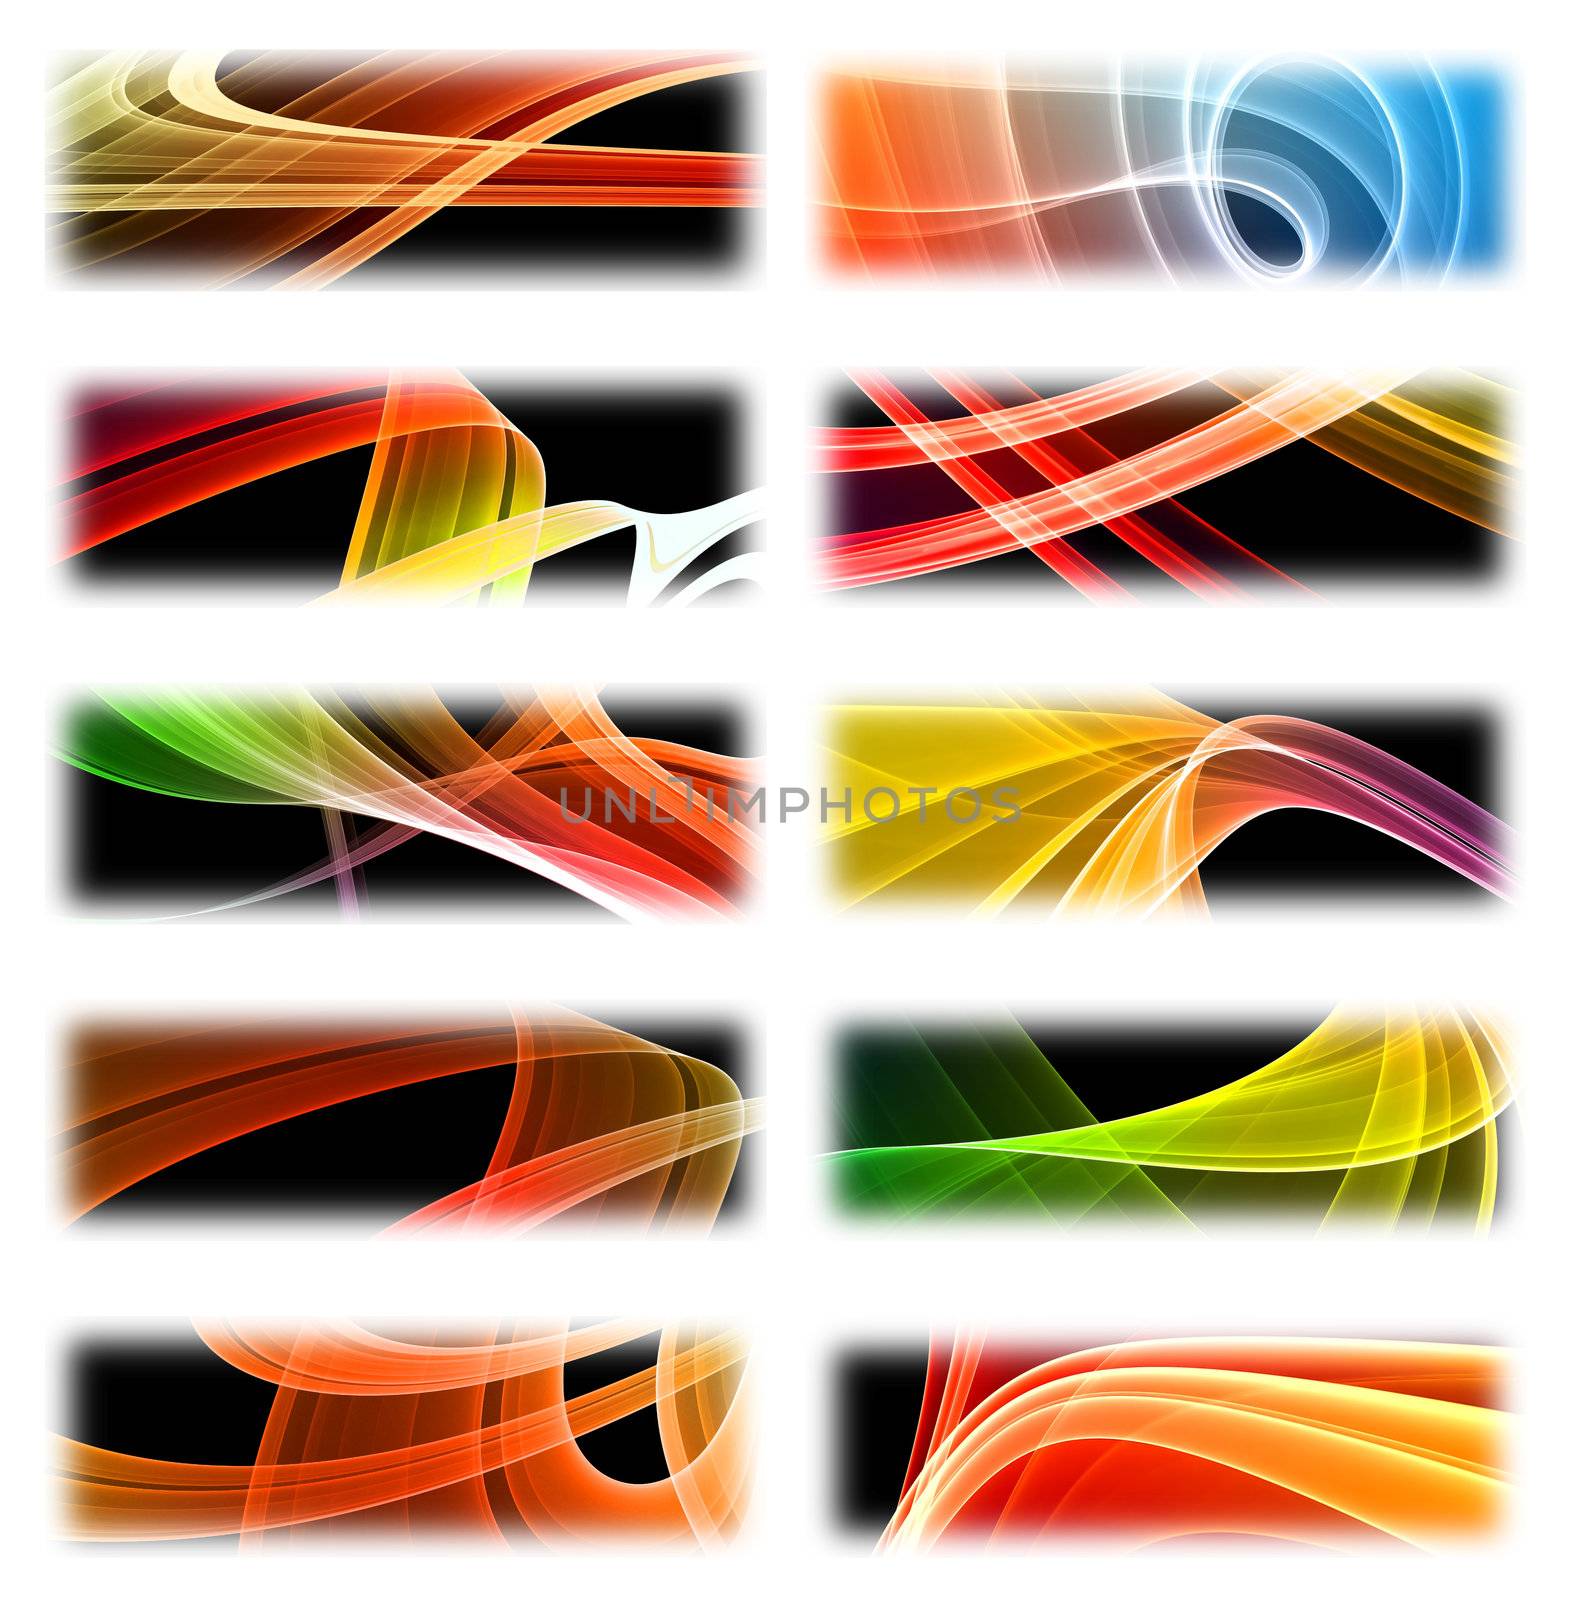 Modern abstract banner set by Jupe